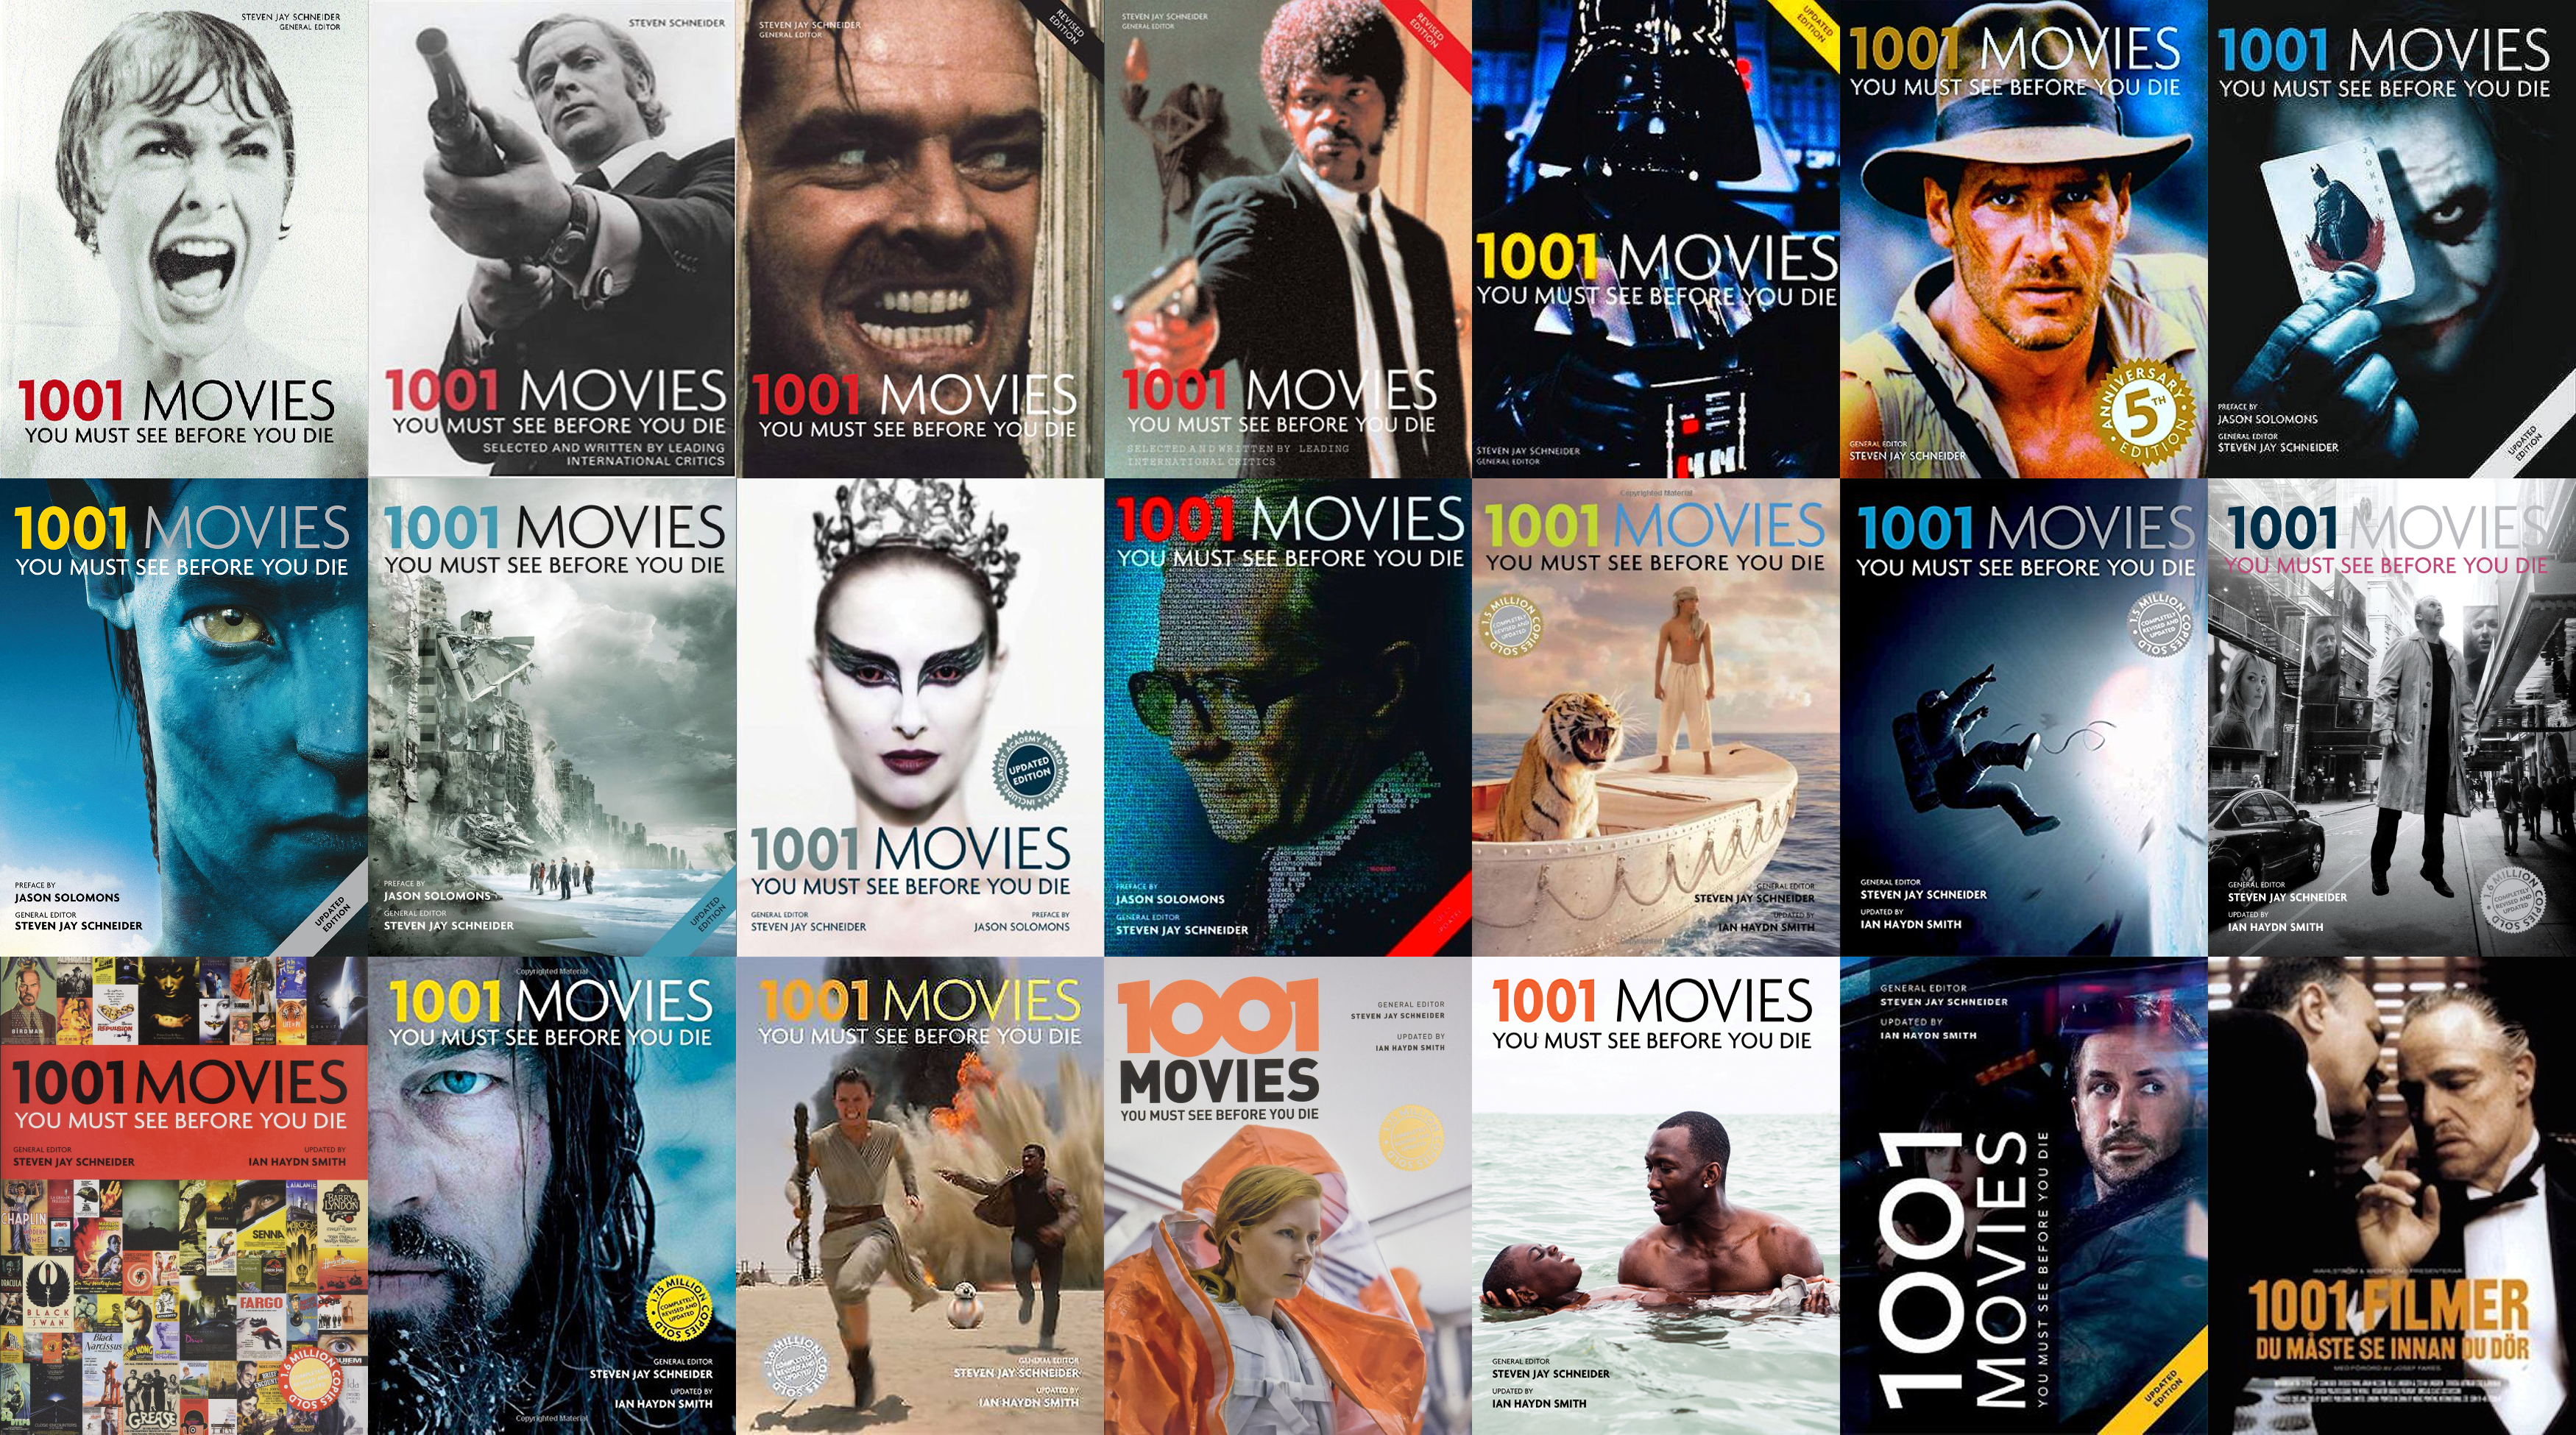 The Film-Lover's Check List: 1001 Movies You Must See Before You Die